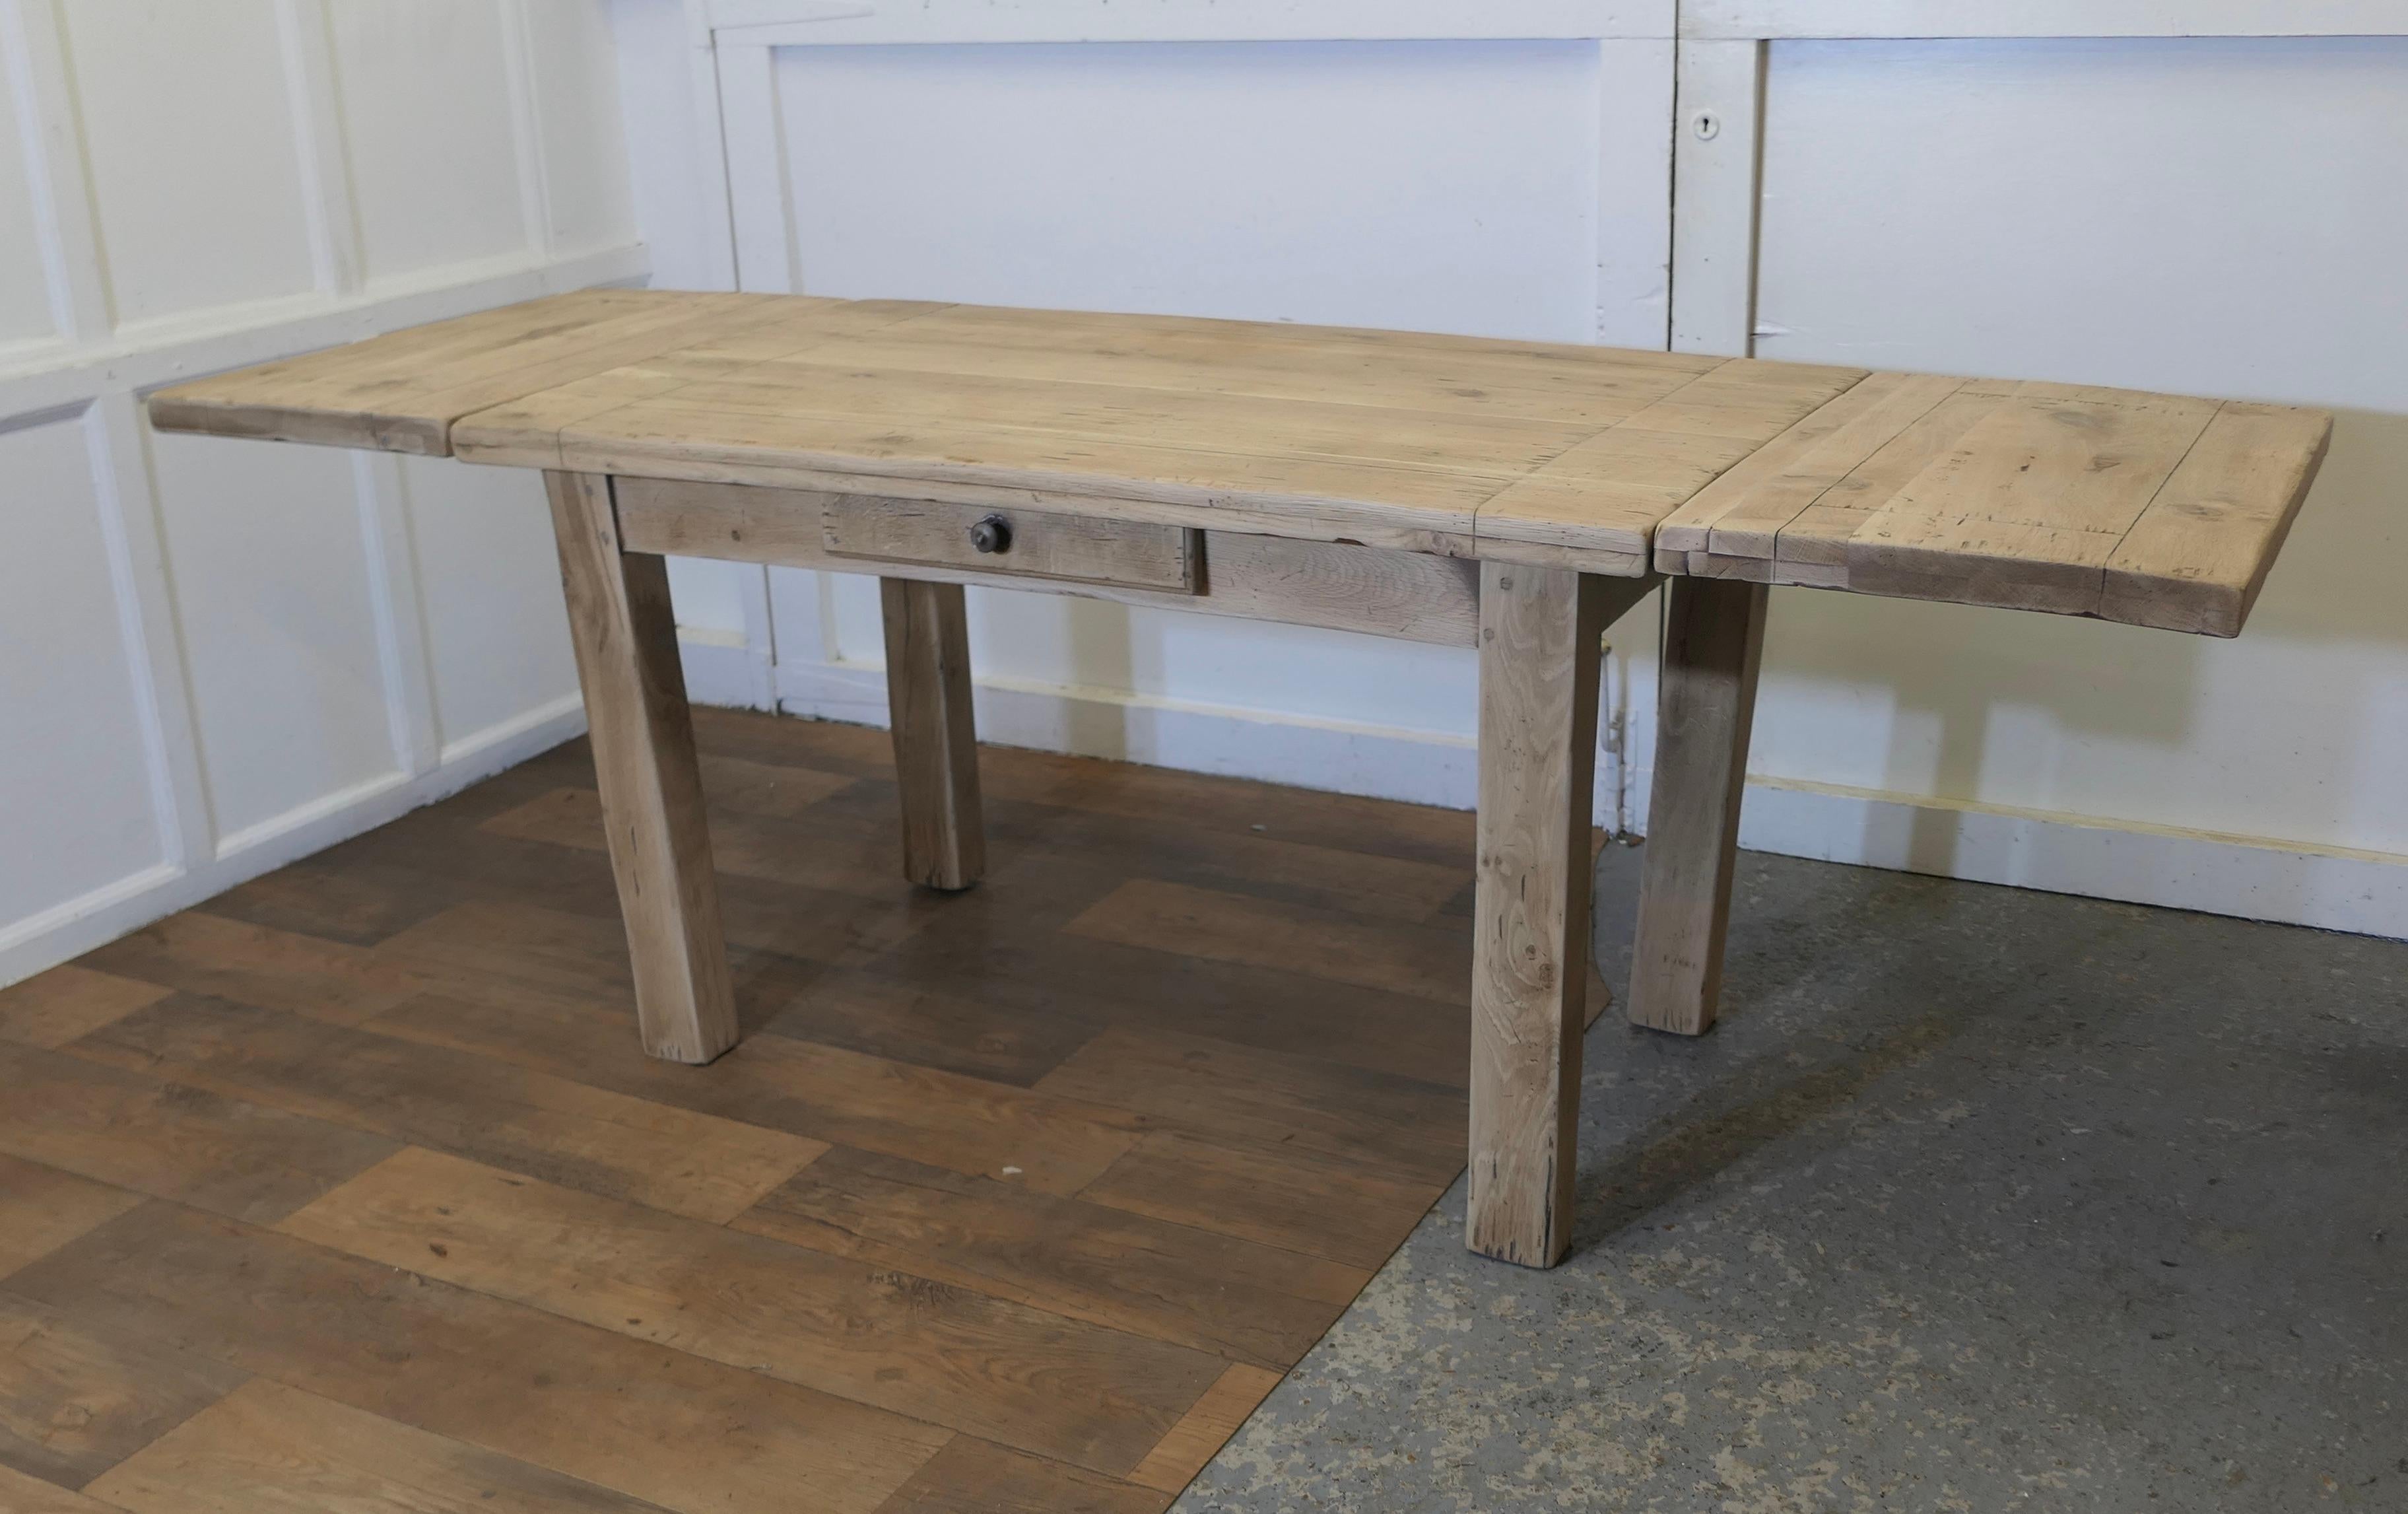 Victorian Sun Bleached Oak 7ft Extending Dining Table  The table is very heavy an solid  For Sale